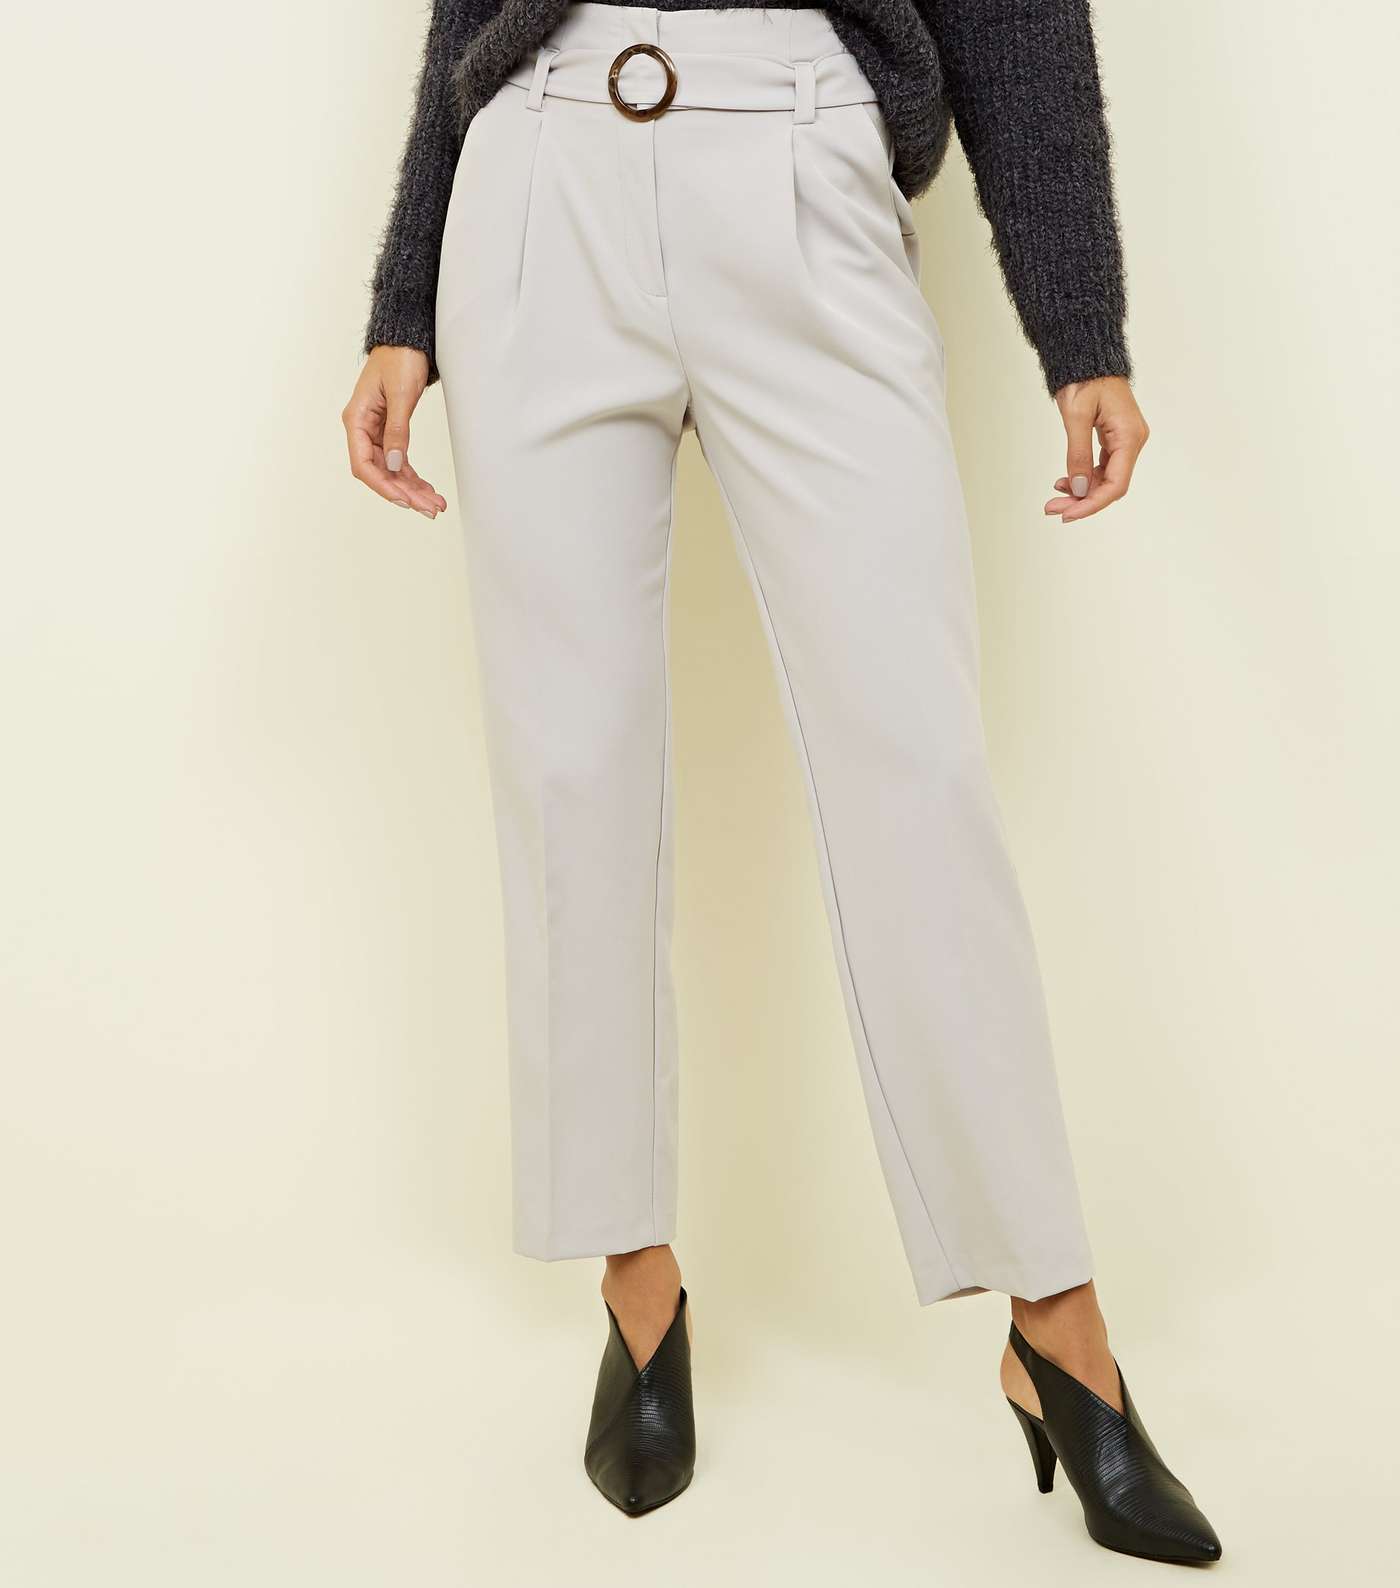 Pale Grey High Waist Buckle Trousers Image 2